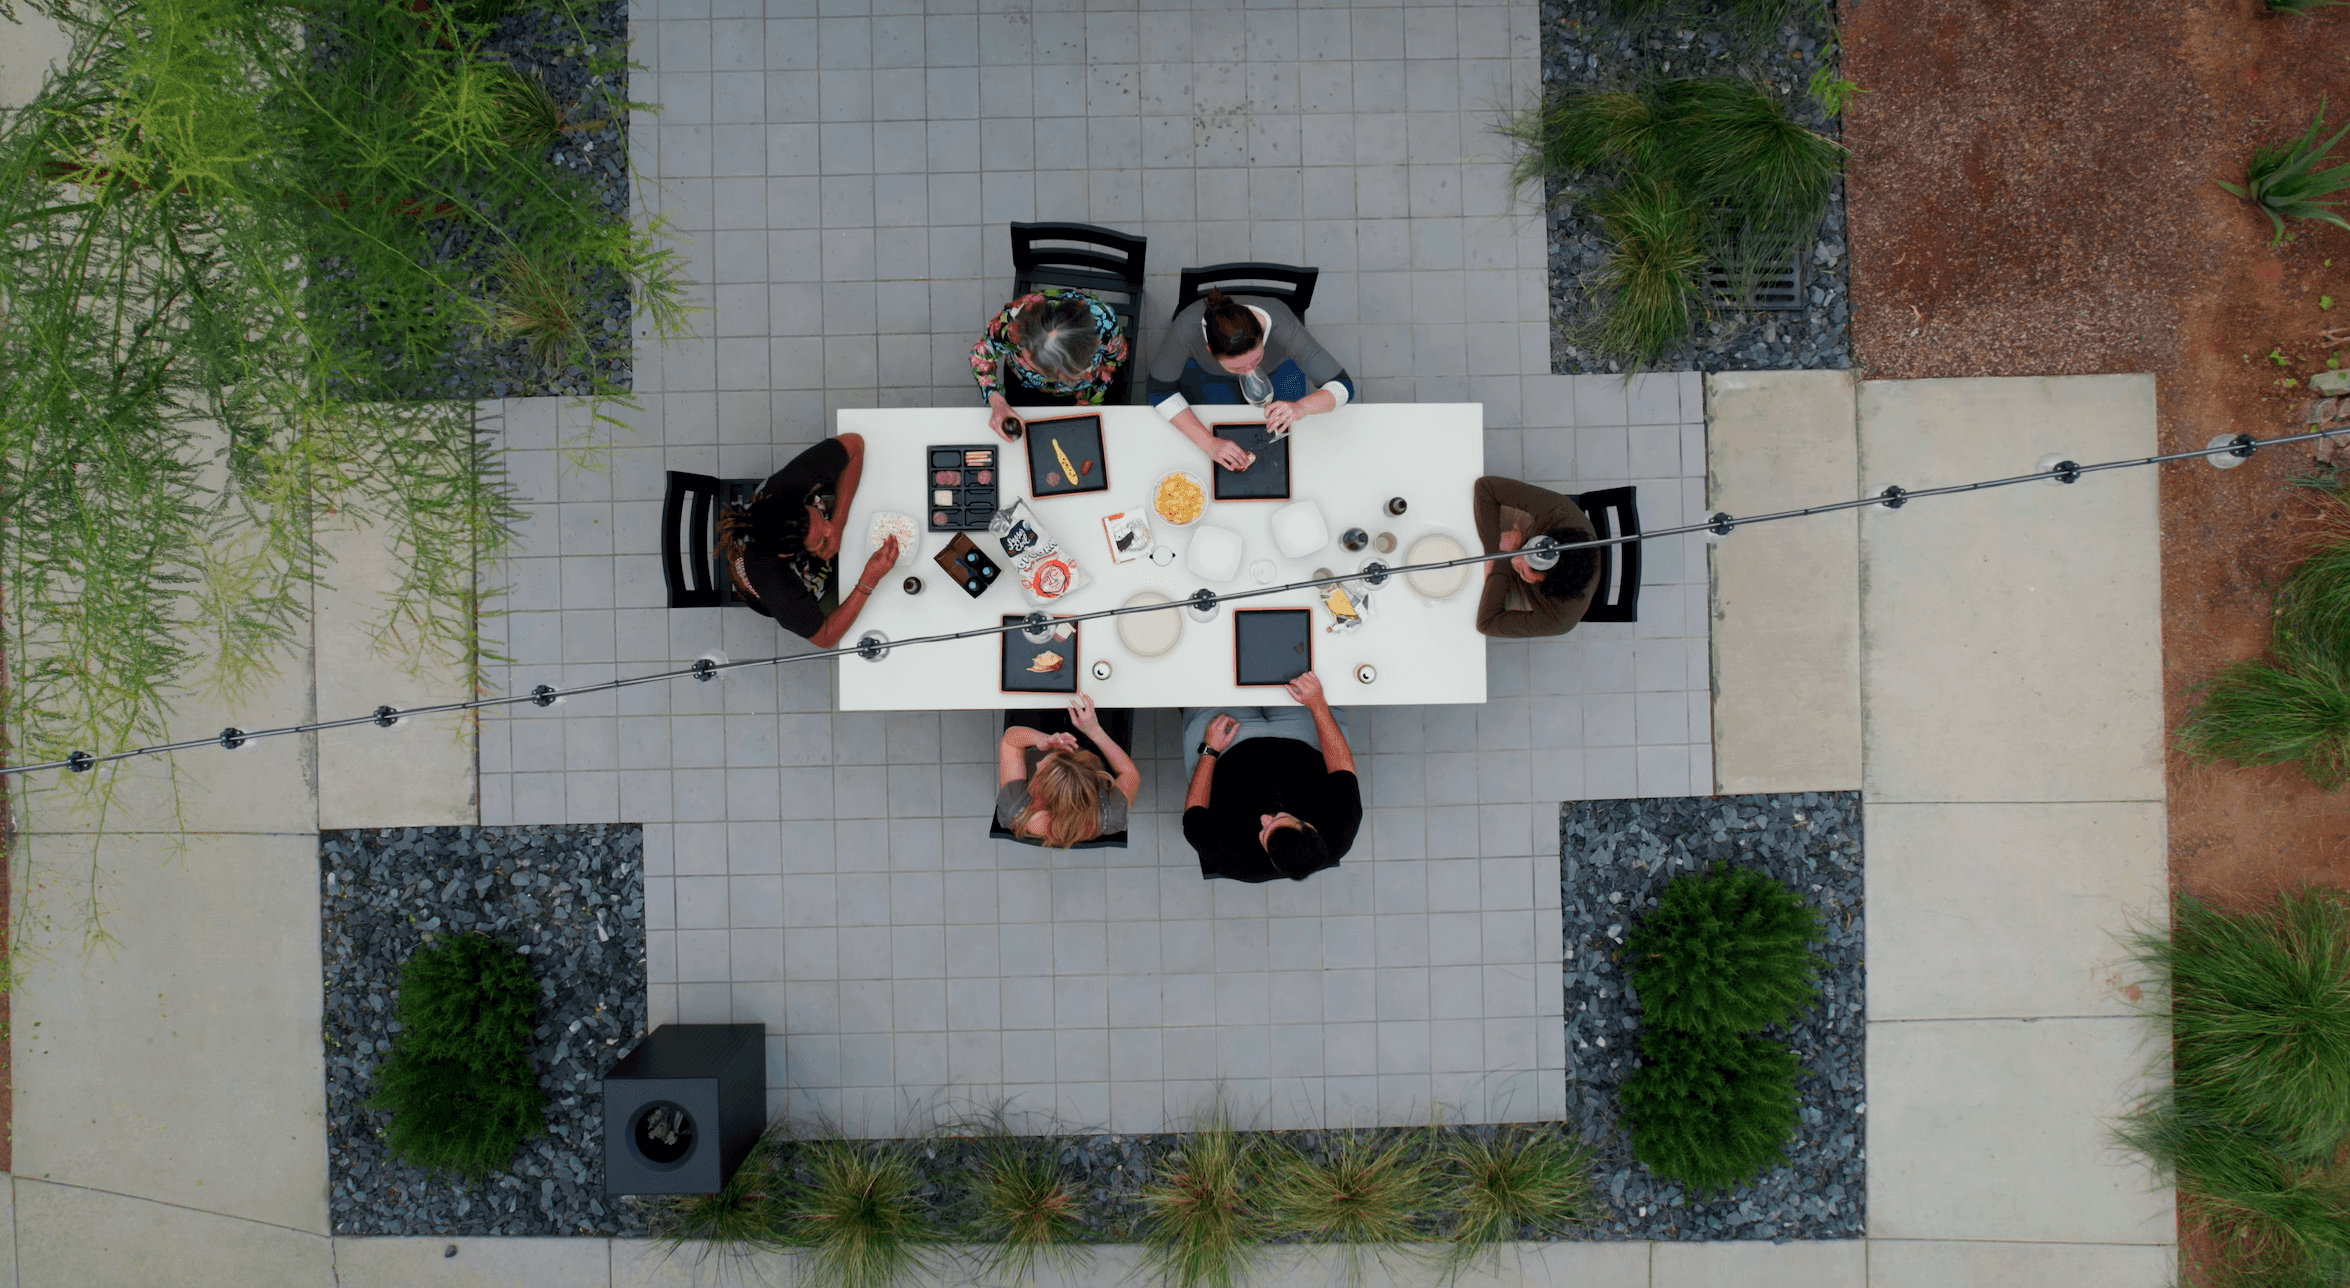 Overhead shot of people enjoying a meal in one of Culdesac's many courtyards.